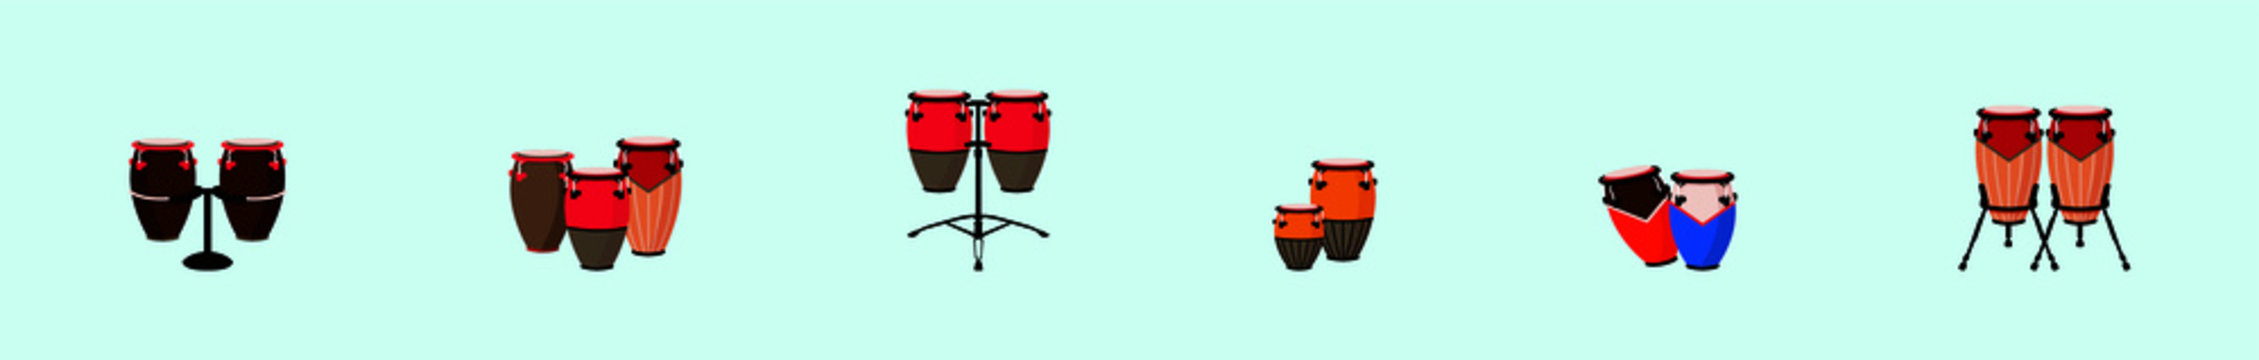 set of conga design template with various models. vector illustration